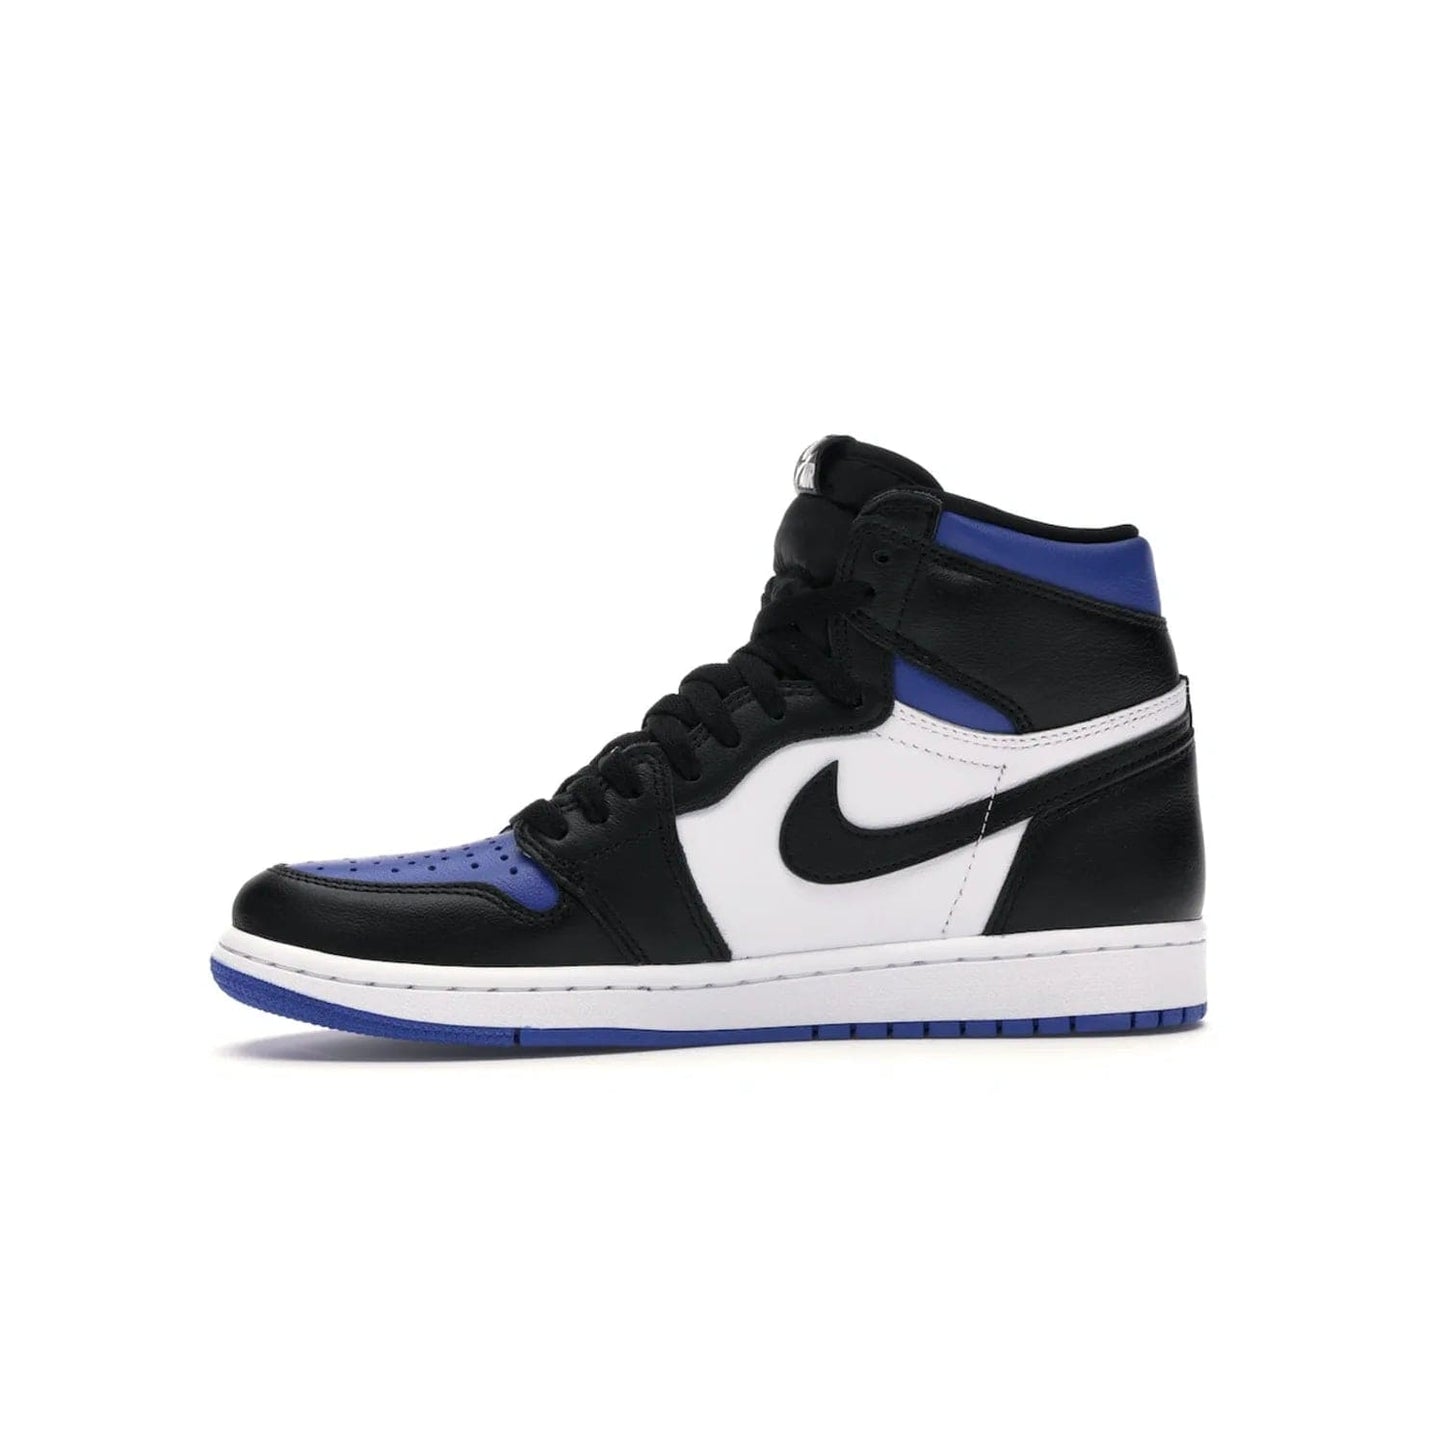 Jordan 1 Retro High Royal Toe - Image 18 - Only at www.BallersClubKickz.com - Refresh your look with the Jordan 1 Retro High Royal Toe. This classic AJ 1 sports a white and royal leather upper, black leather overlays, and branded leather tongue tag. Pick up today and set the streets ablaze.